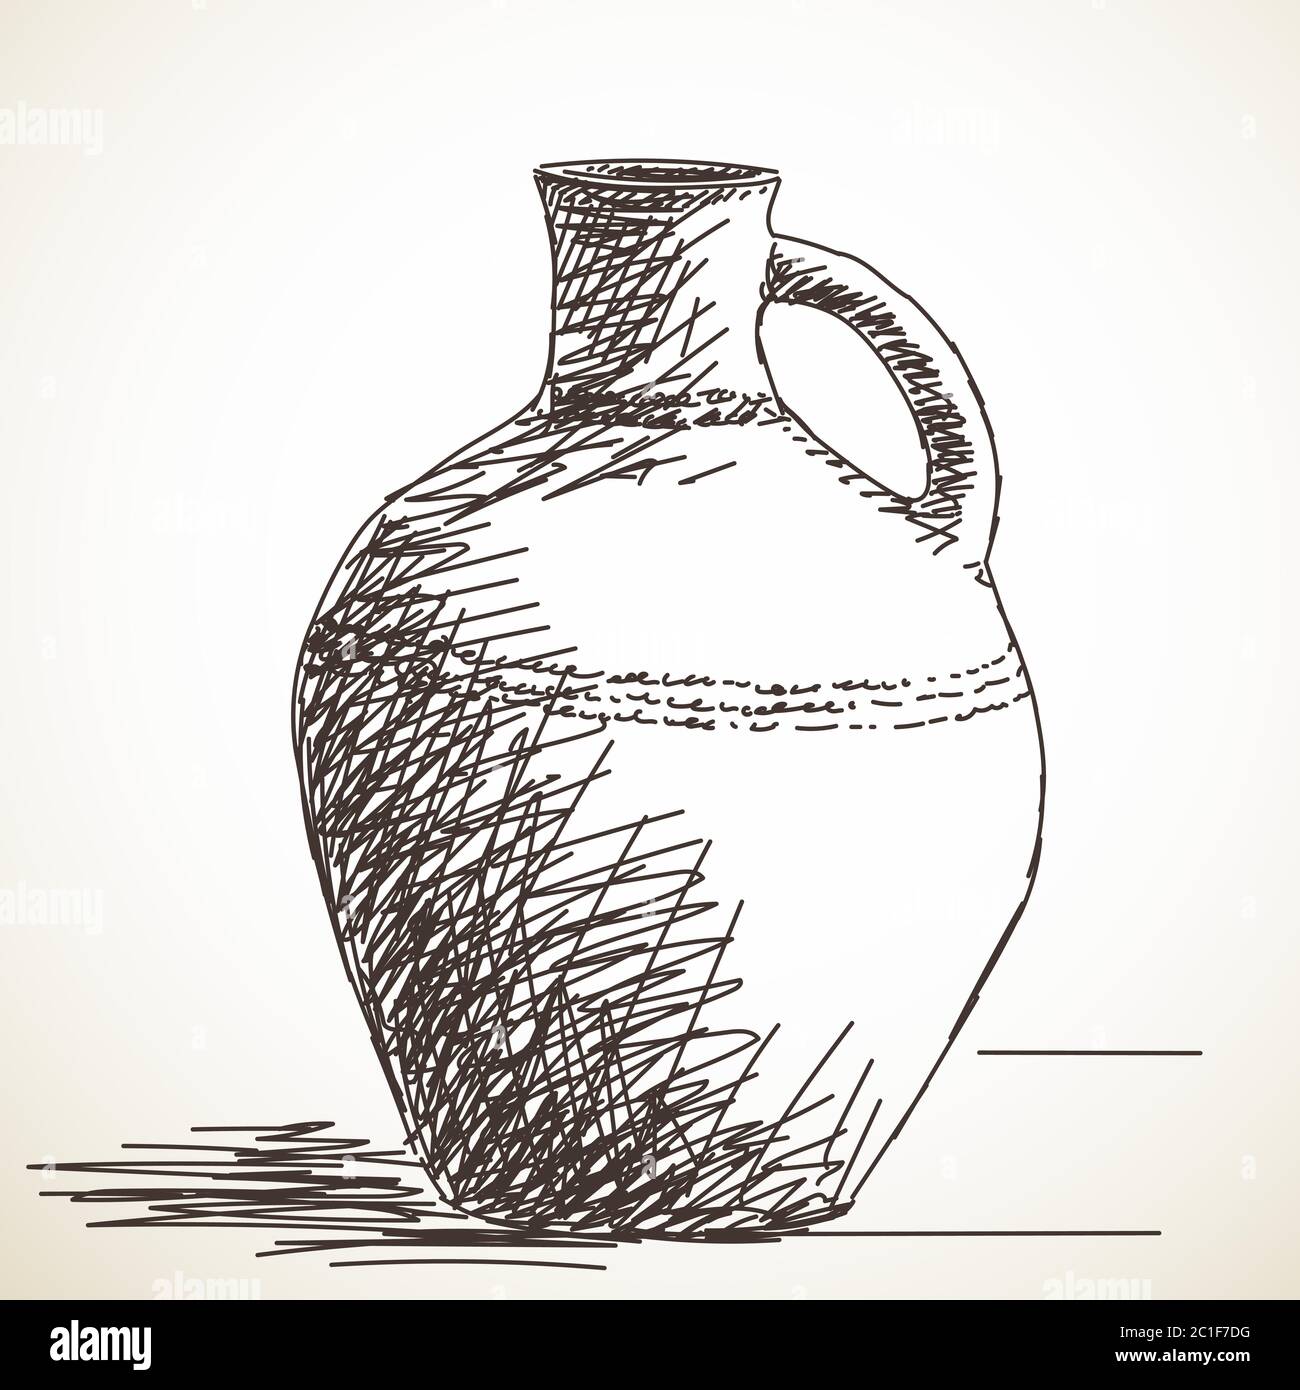 Pottery Drawing PNG and Pottery Drawing Transparent Clipart Free Download.  - CleanPNG / KissPNG